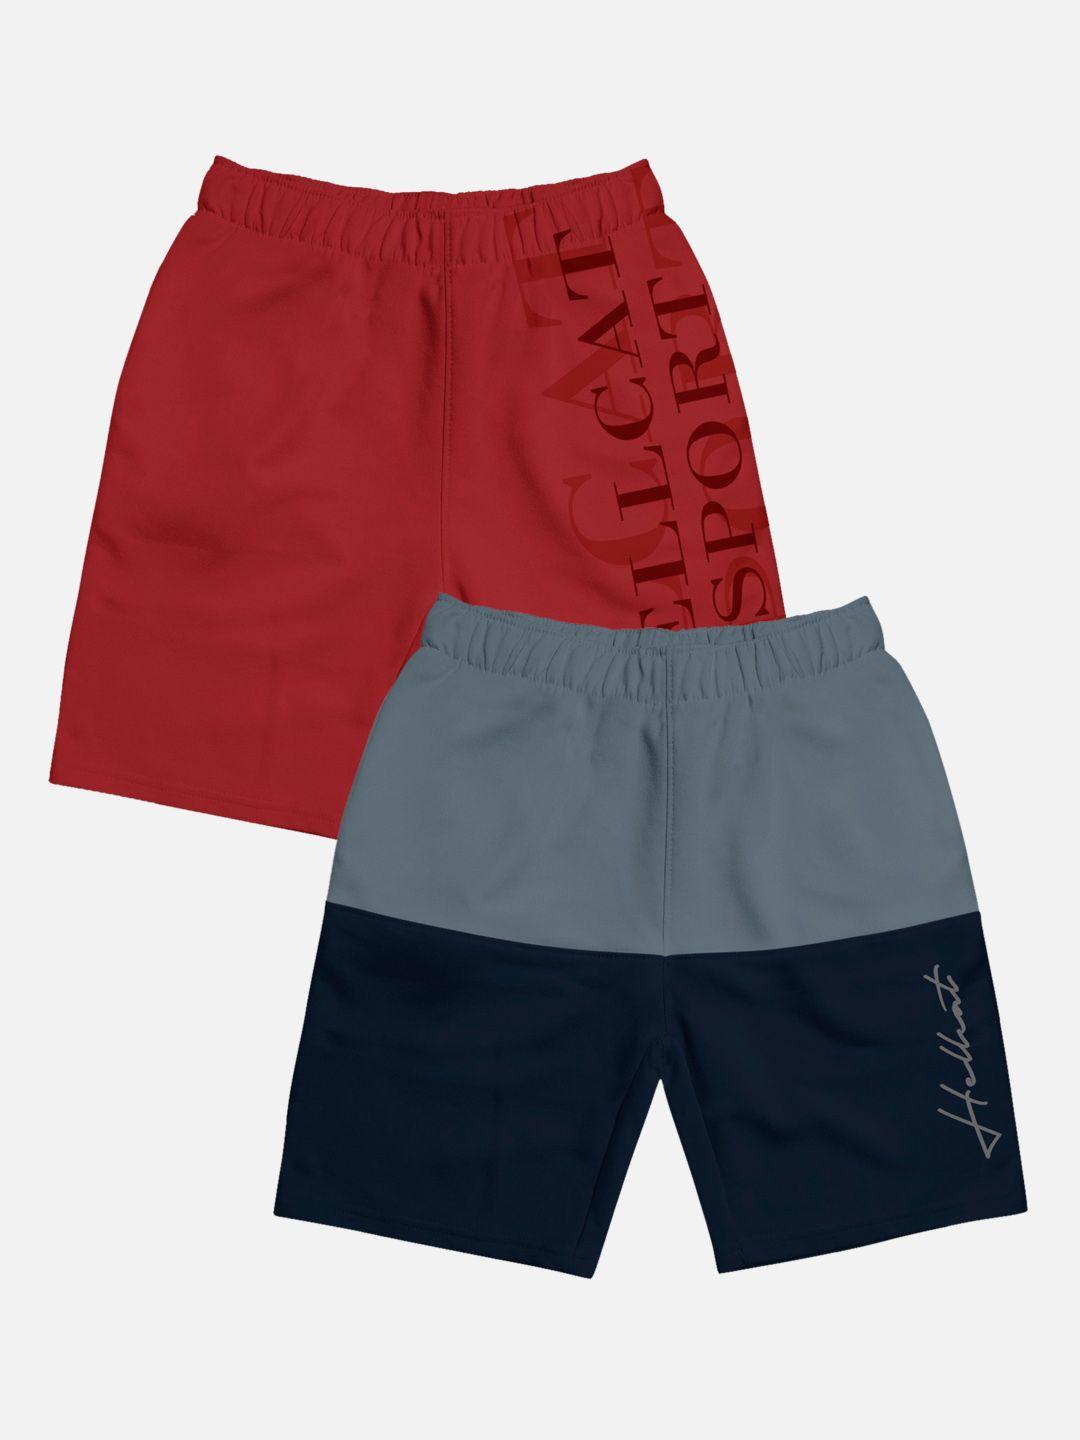 hellcat boys pack of 2 typography printed mid-rise cotton shorts